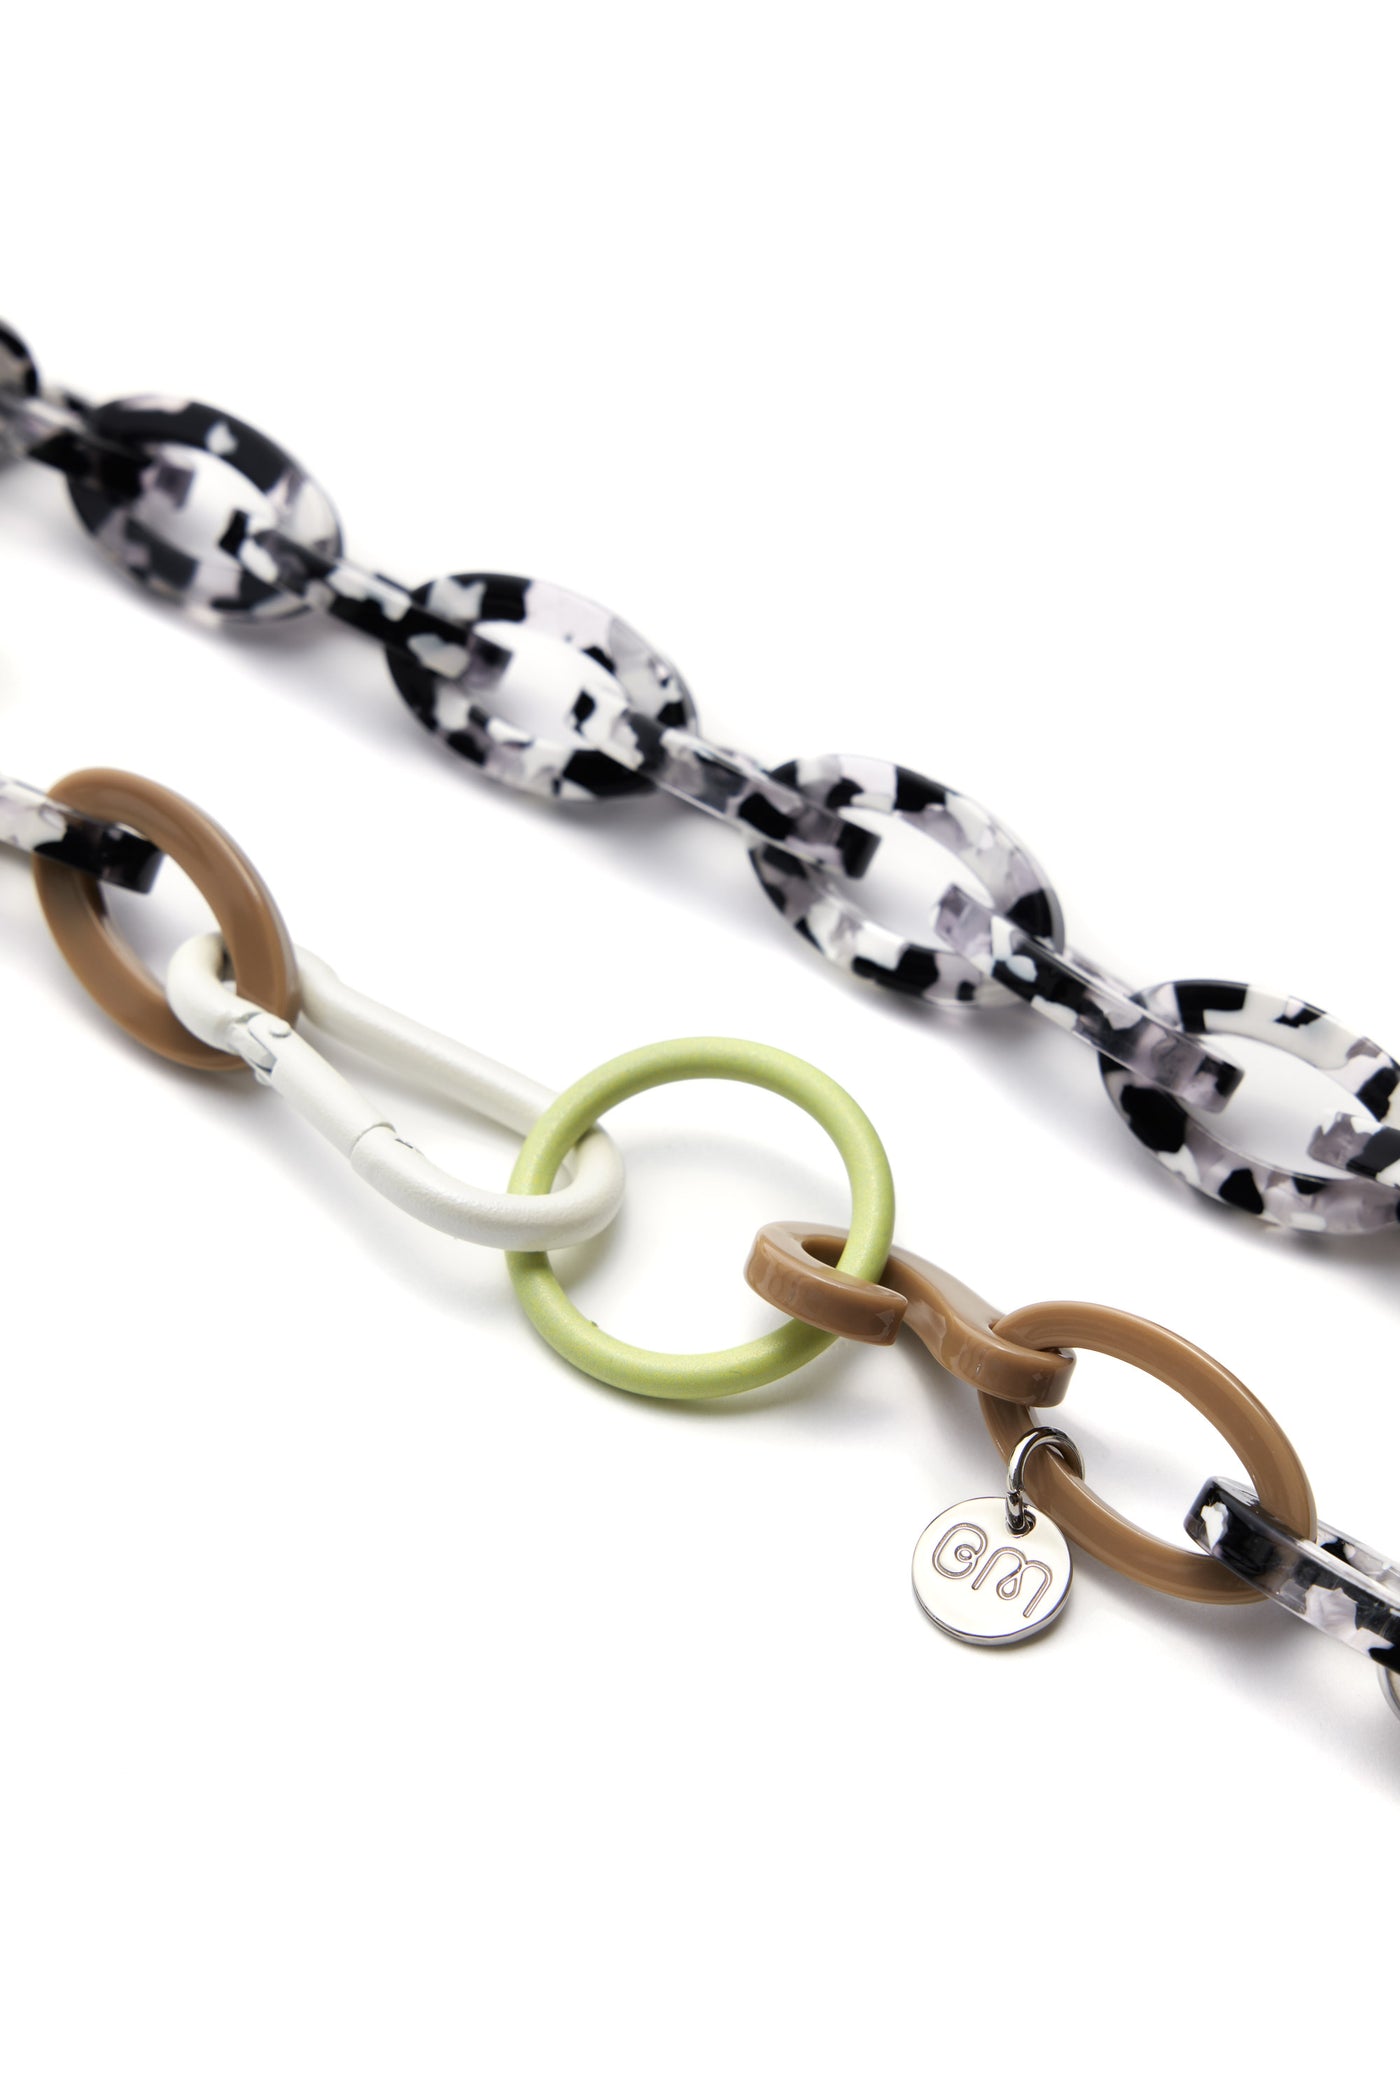 Bianca Mavrick Jewellery Static Chain Link Necklace with Pearl White Carabiner & Ring Clasp Detail